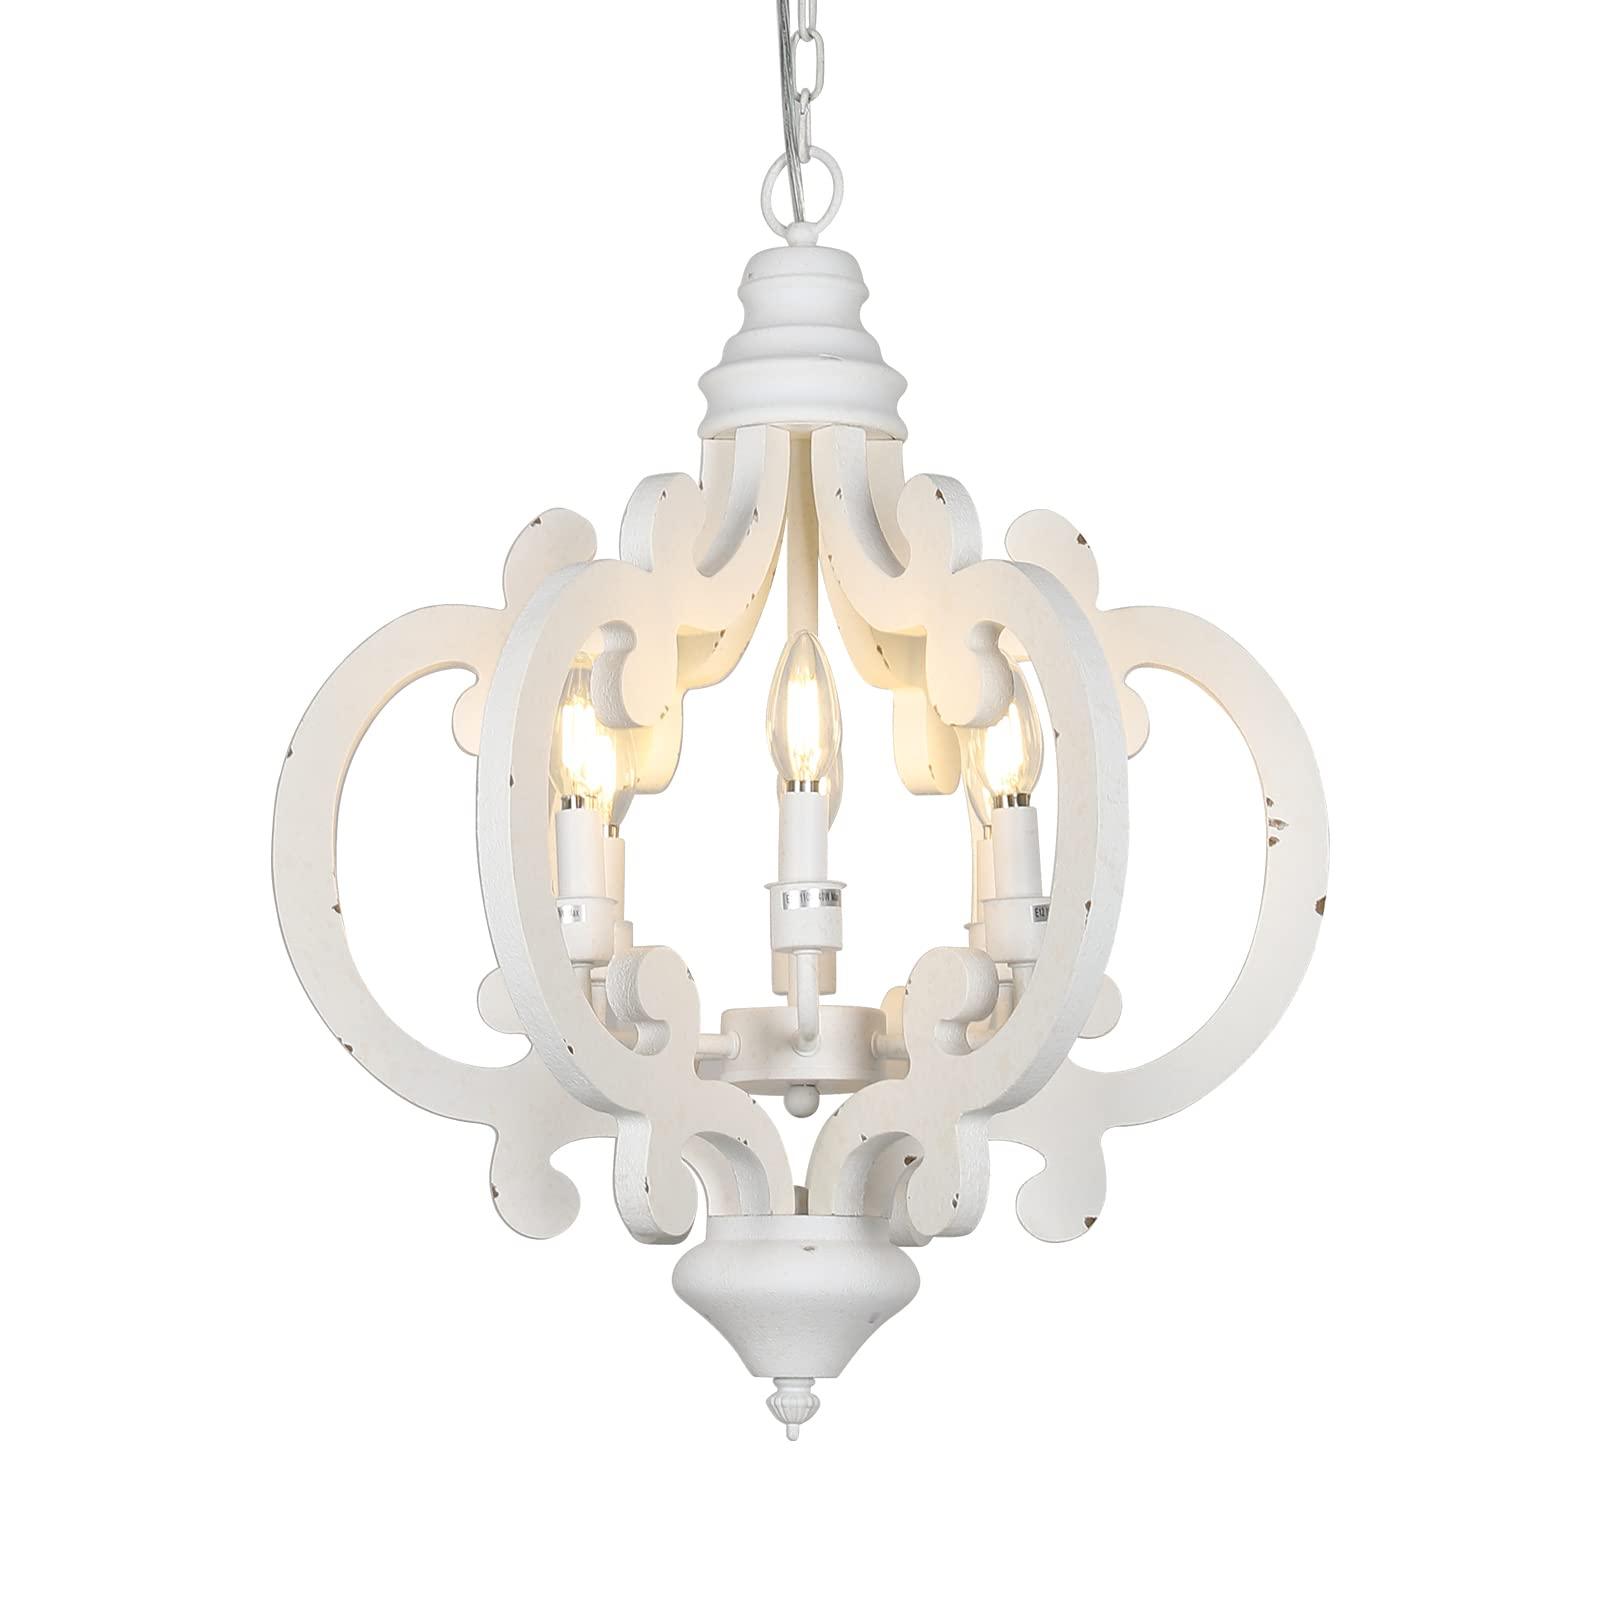 HMVPL Famrhouse Chandeliers for Bedrooms,6-Lights Dining Room Light Fixtures Over Table,Farmhouse Wooden Pendant Light with Candle Sockets,Retro Chandelier for Living Room Kitchen Foyer Island(20.1") - HMVPL